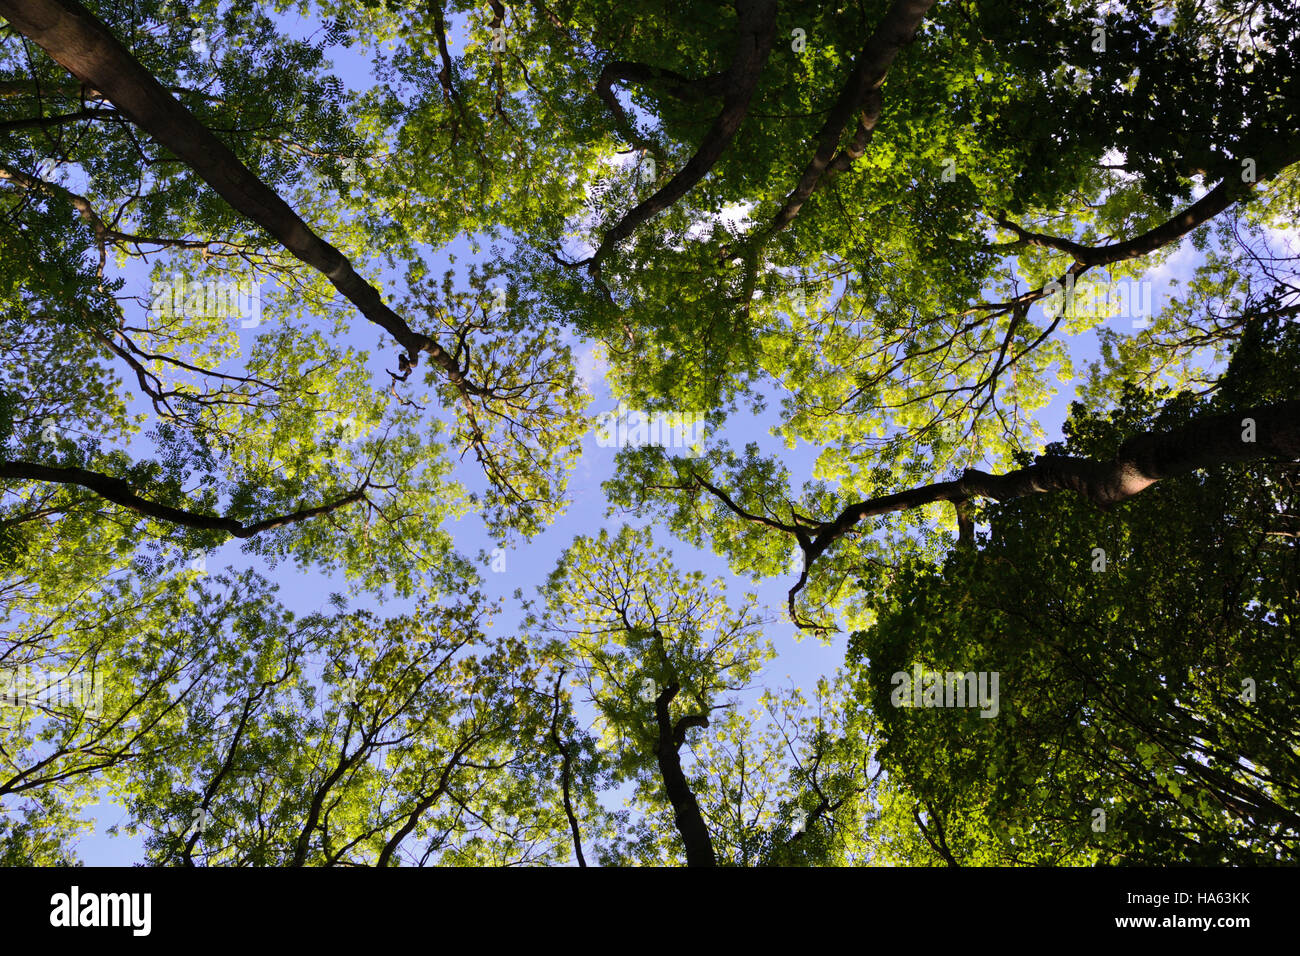 Looking up through a canopy of trees to a blue sky Stock Photo